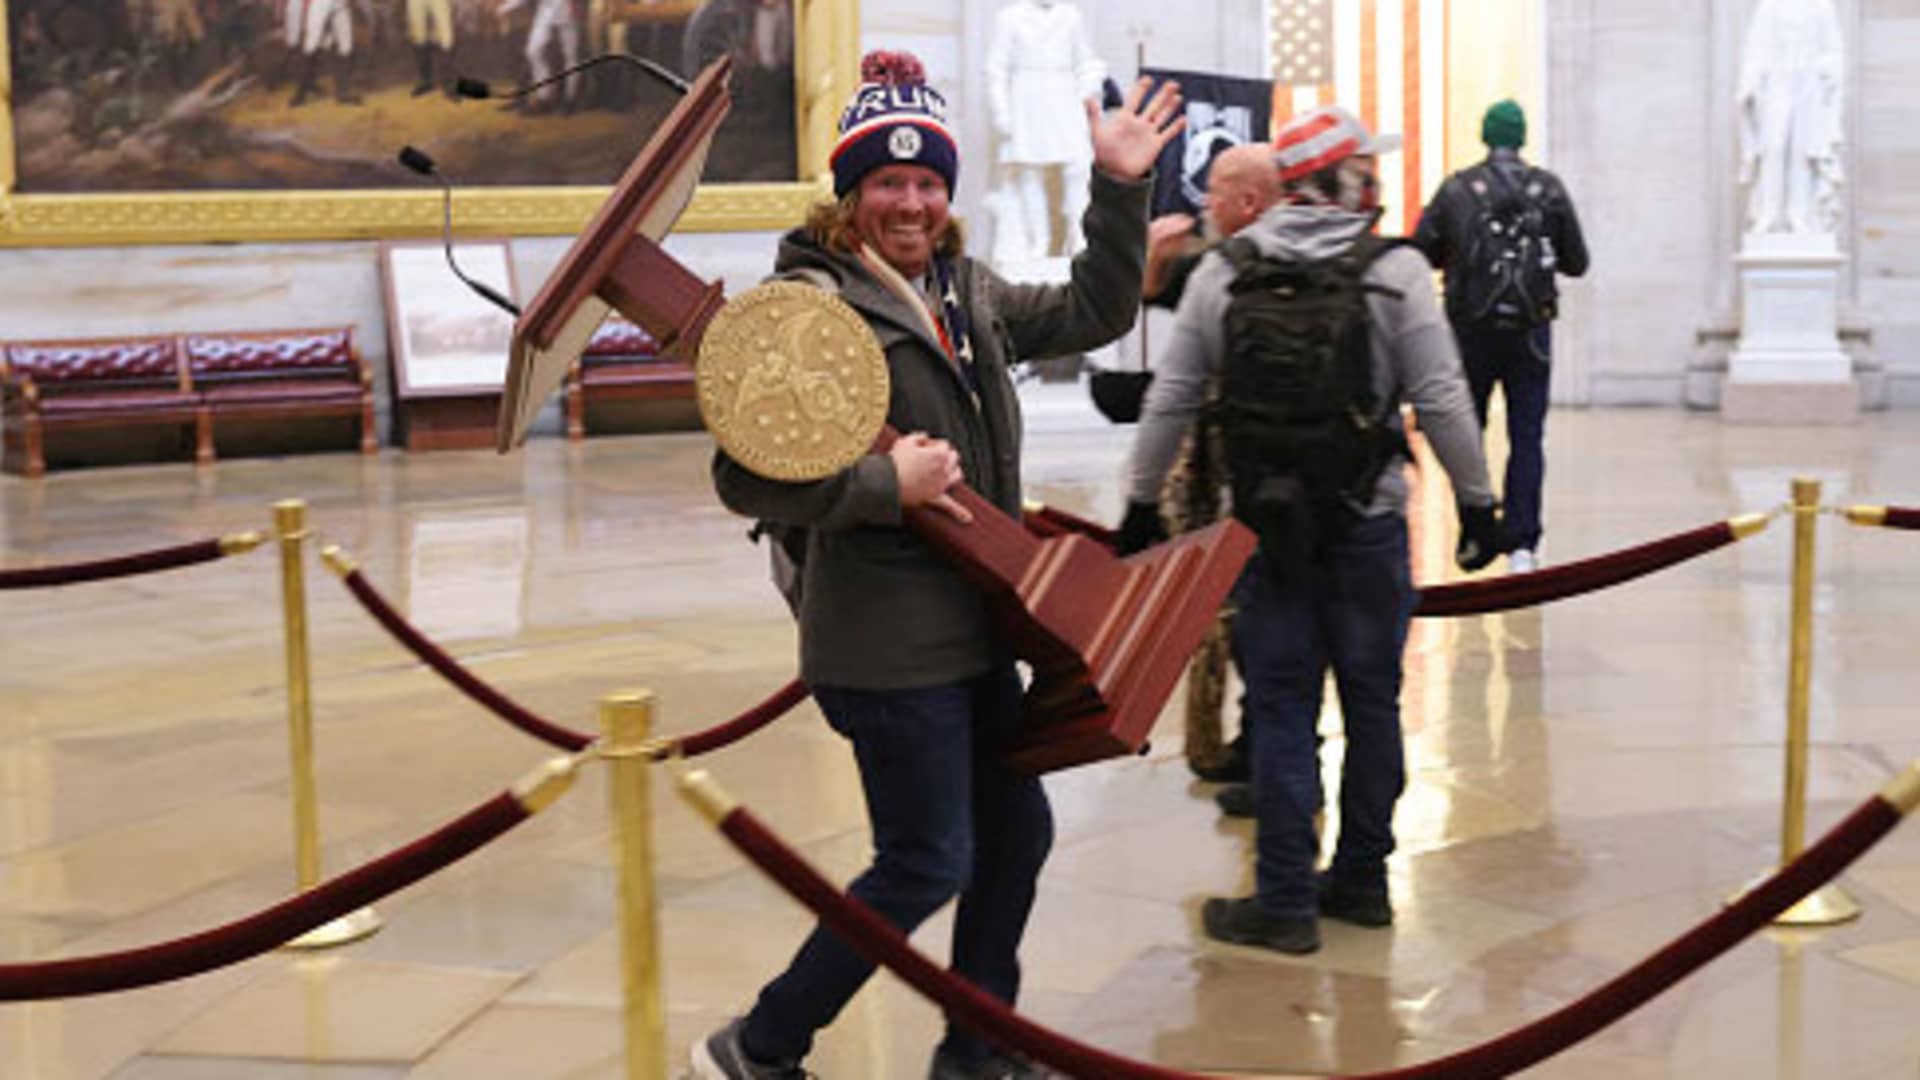 Protesters enter the U.S. Capitol Building on January 06, 2021 in Washington, DC. Congress held a joint session today to ratify President-elect Joe Biden's 306-232 Electoral College win over President Donald Trump.